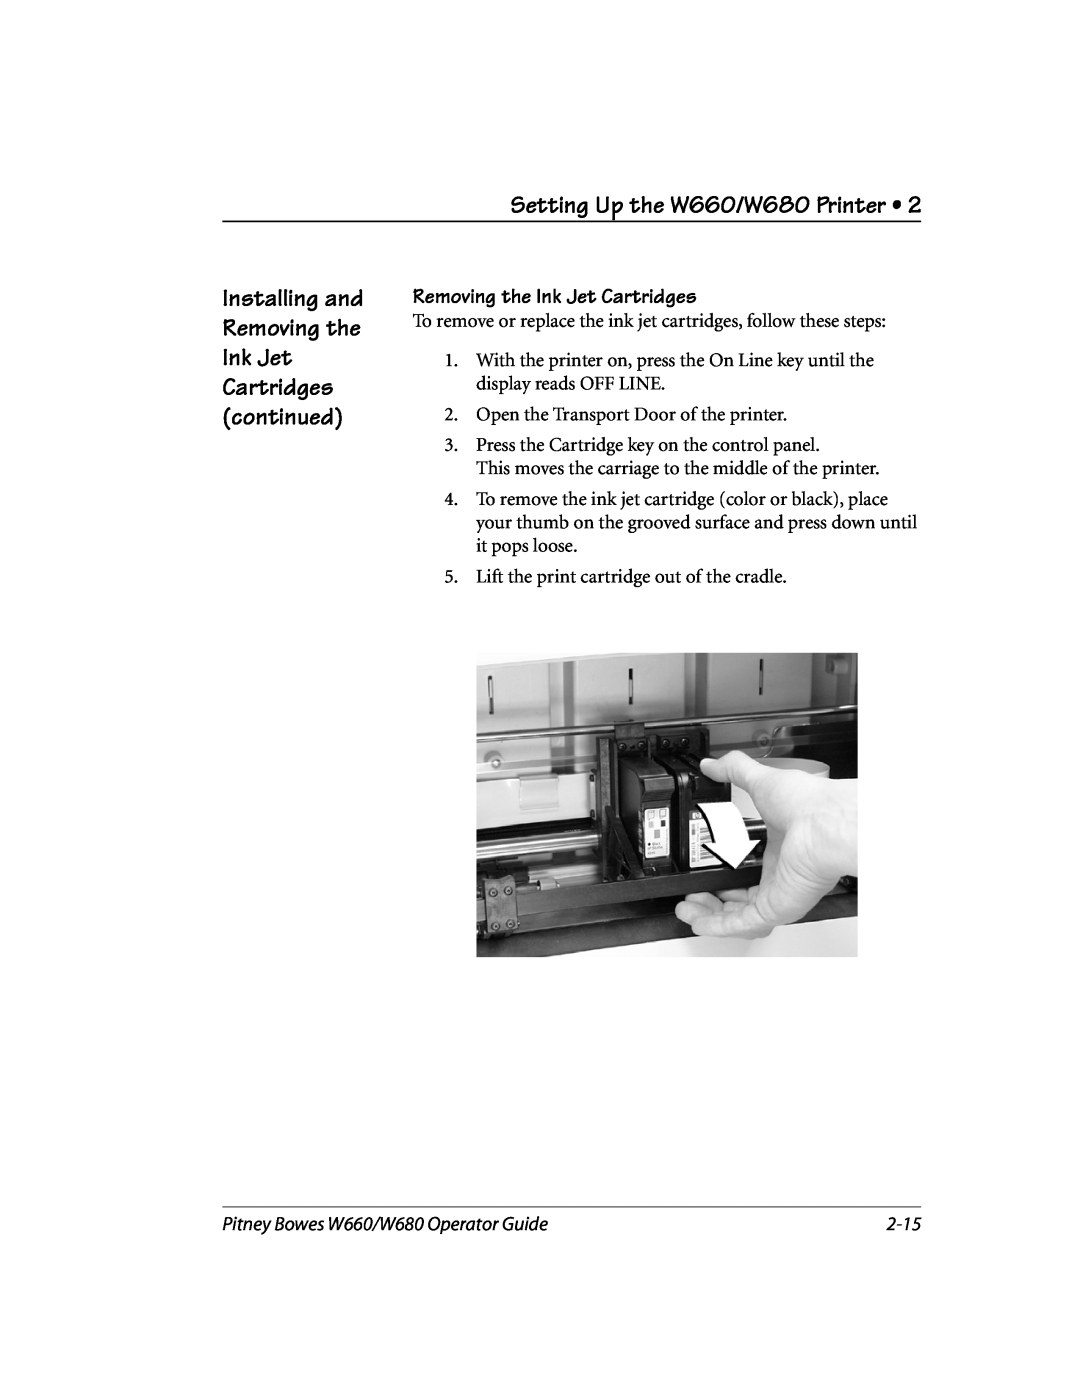 Pitney Bowes manual Removing the Ink Jet Cartridges, 2-15, Setting Up the W660/W680 Printer 